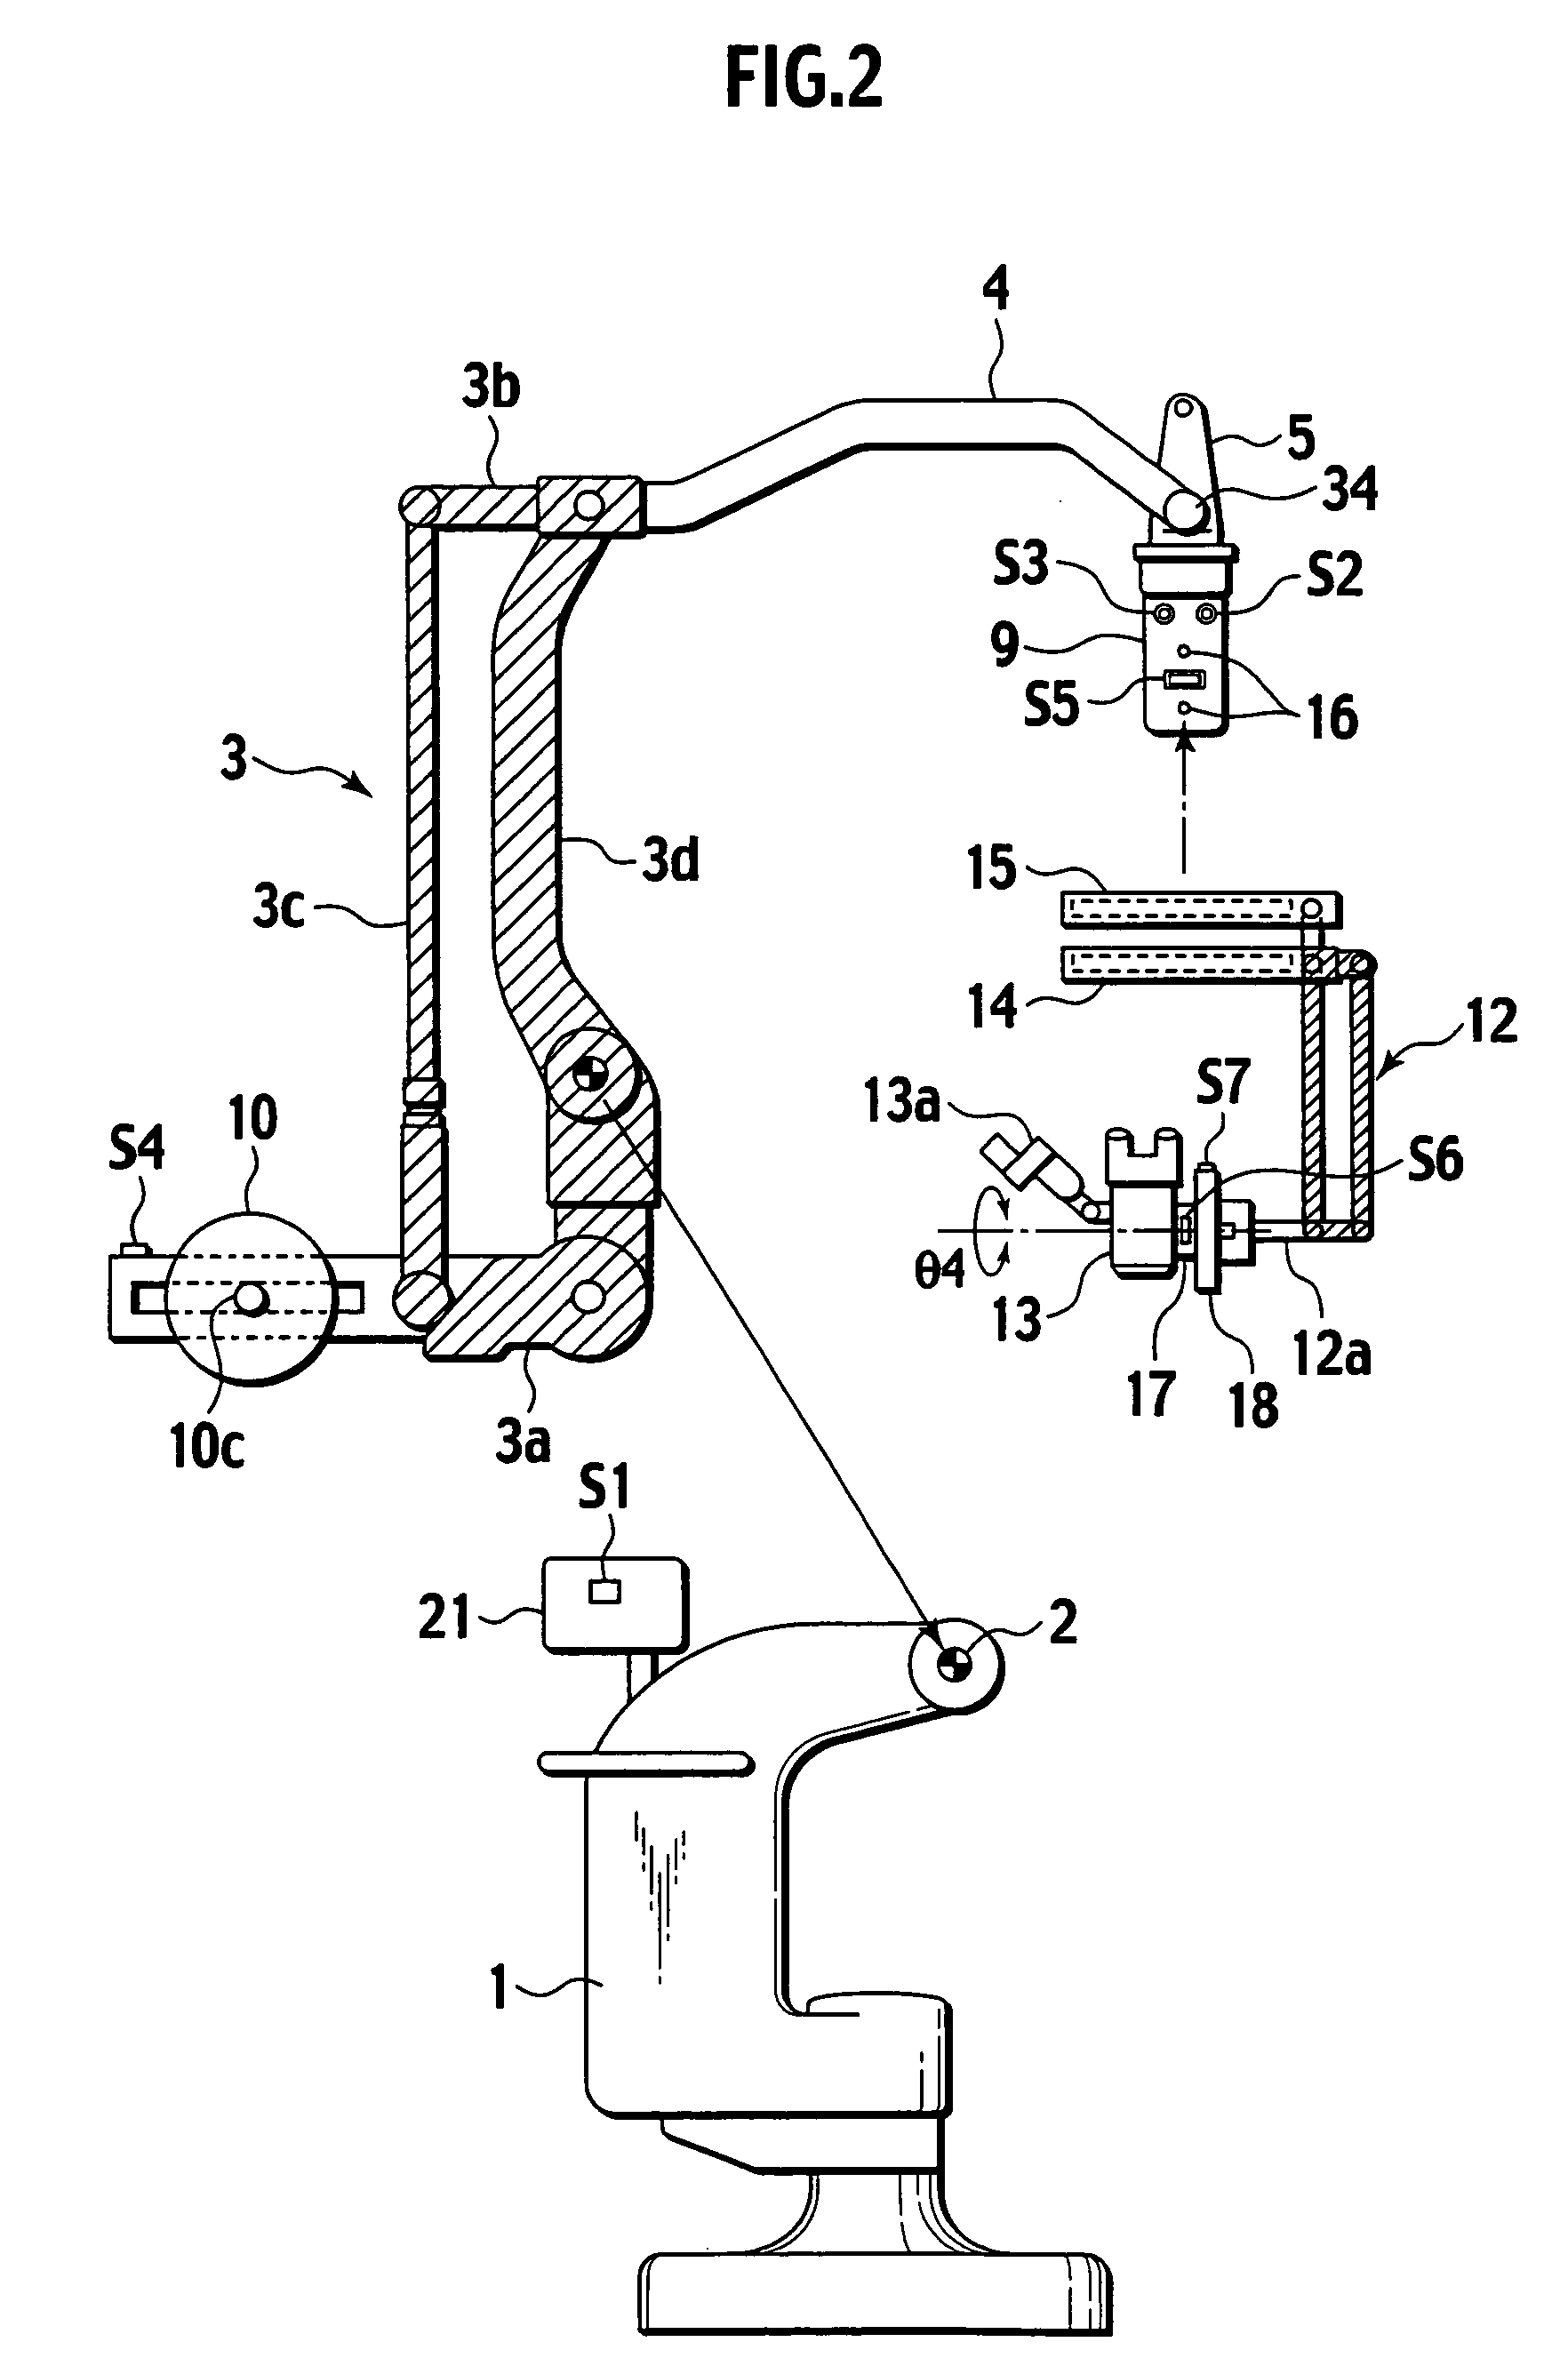 Weight balancing mechanism for operation microscope stand